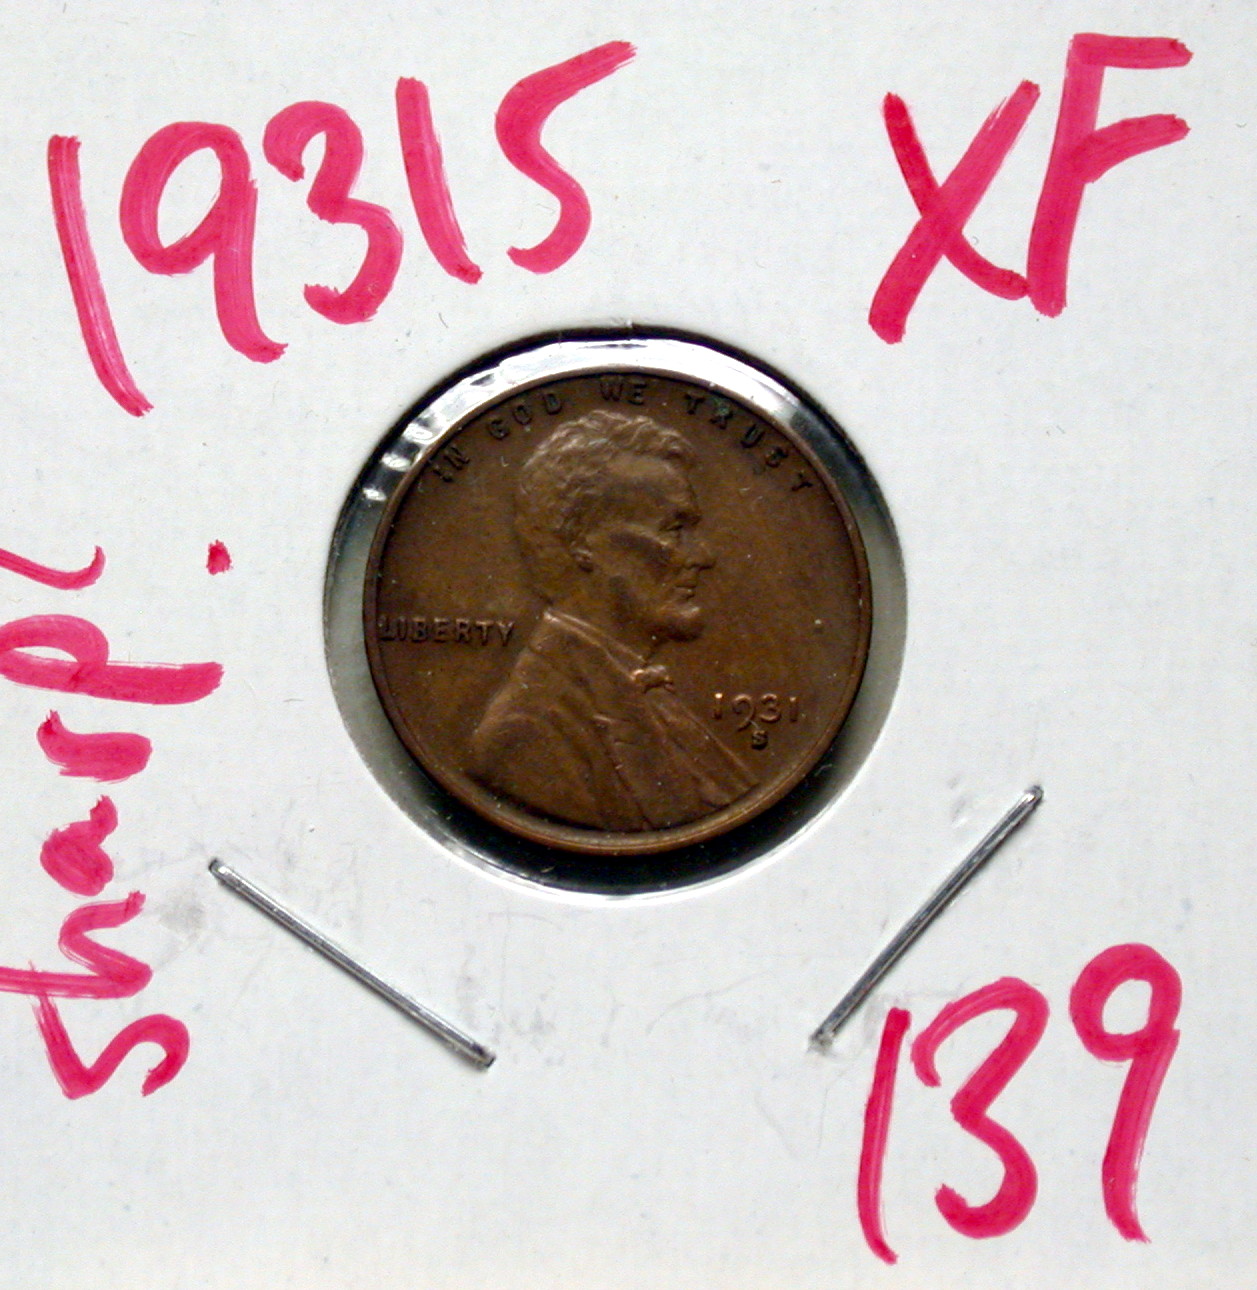 1931 S Lincoln Cent in Xtra-Fine - Click Image to Close